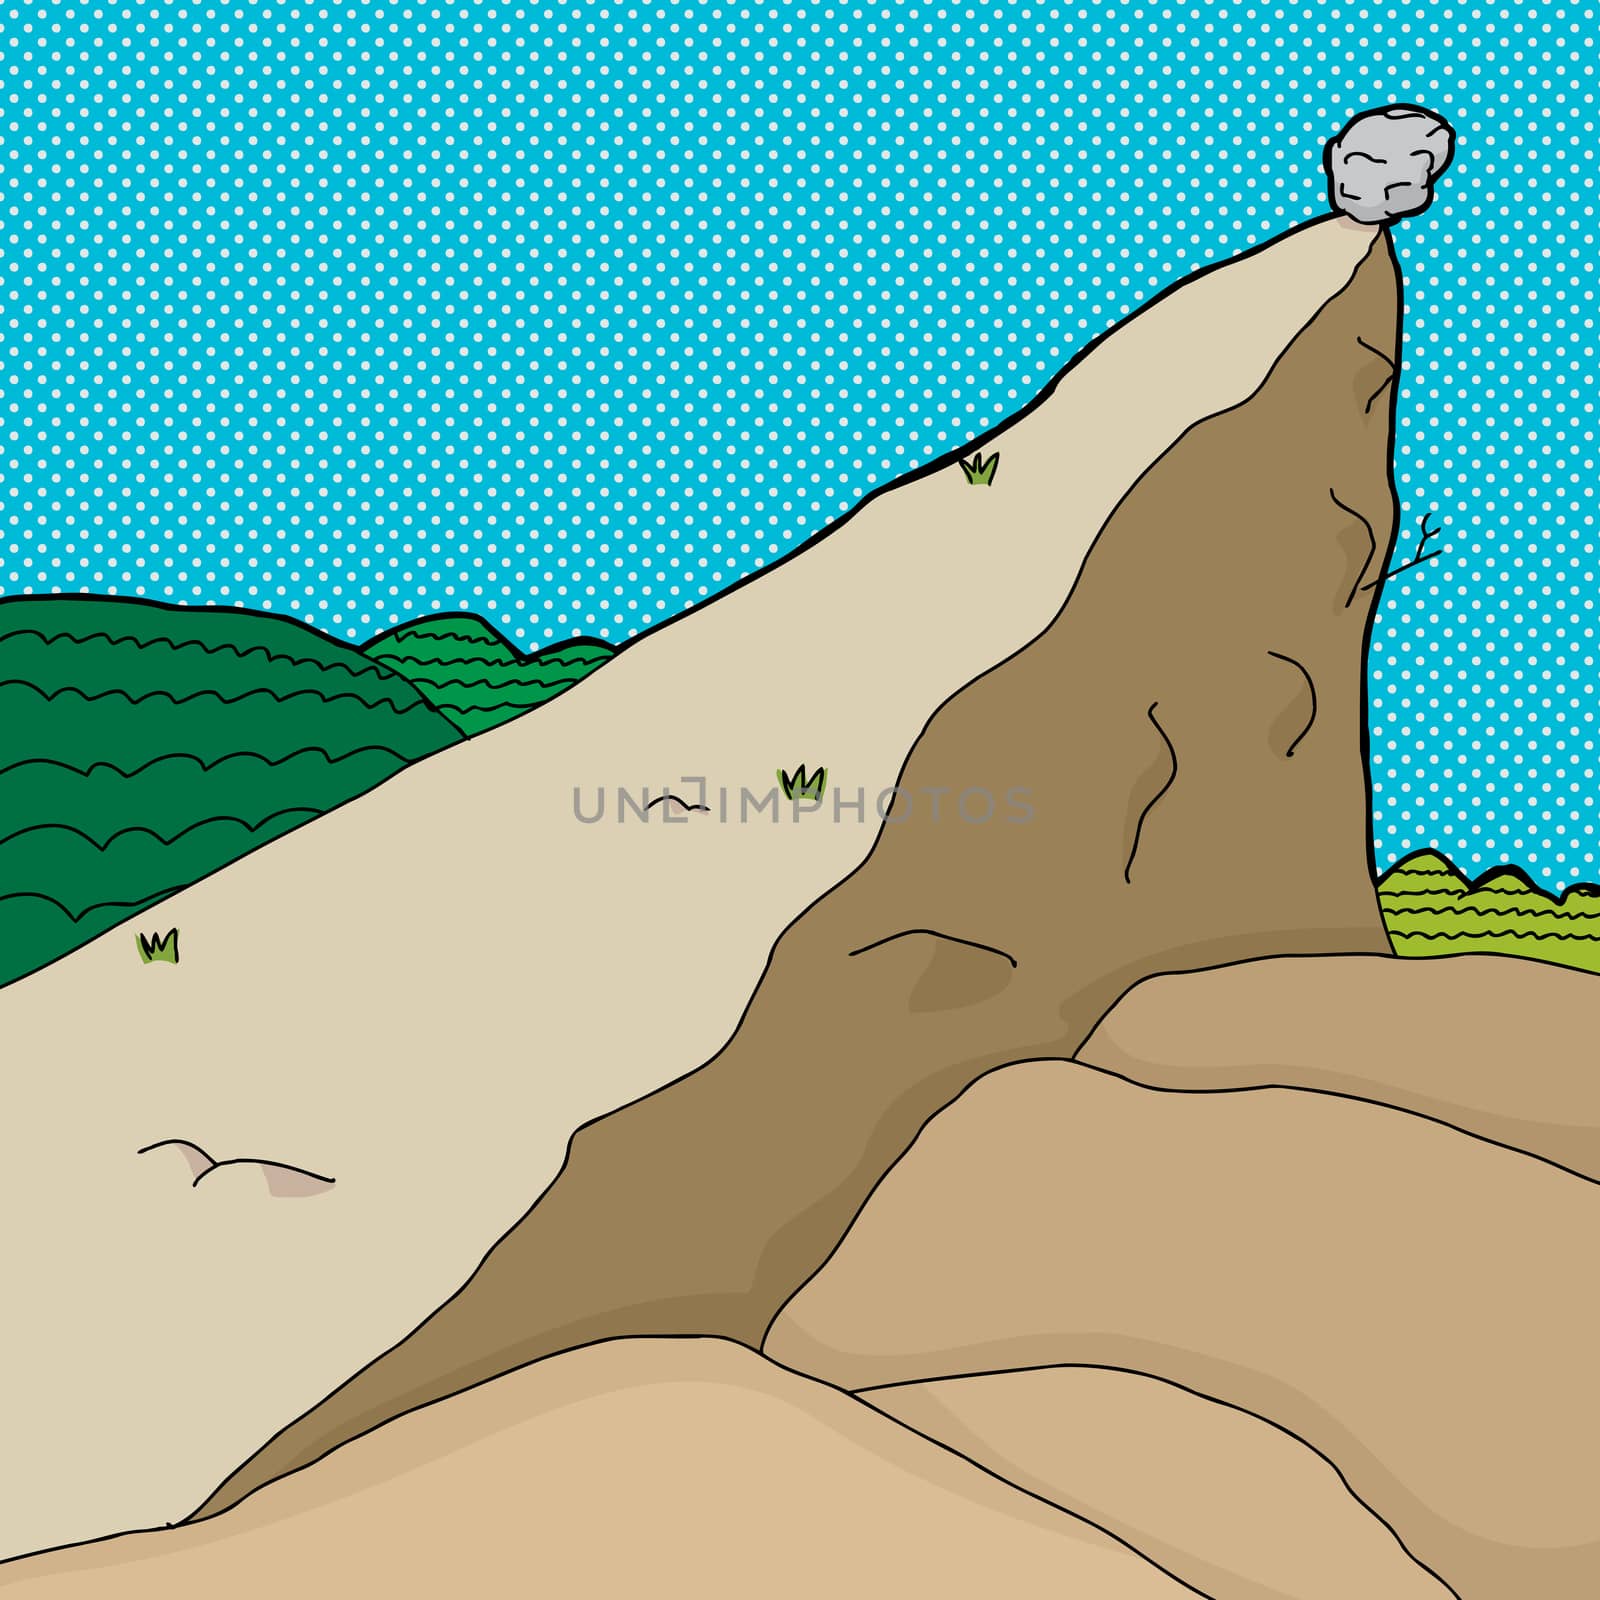 Wilderness background with single boulder on edge of outcrop